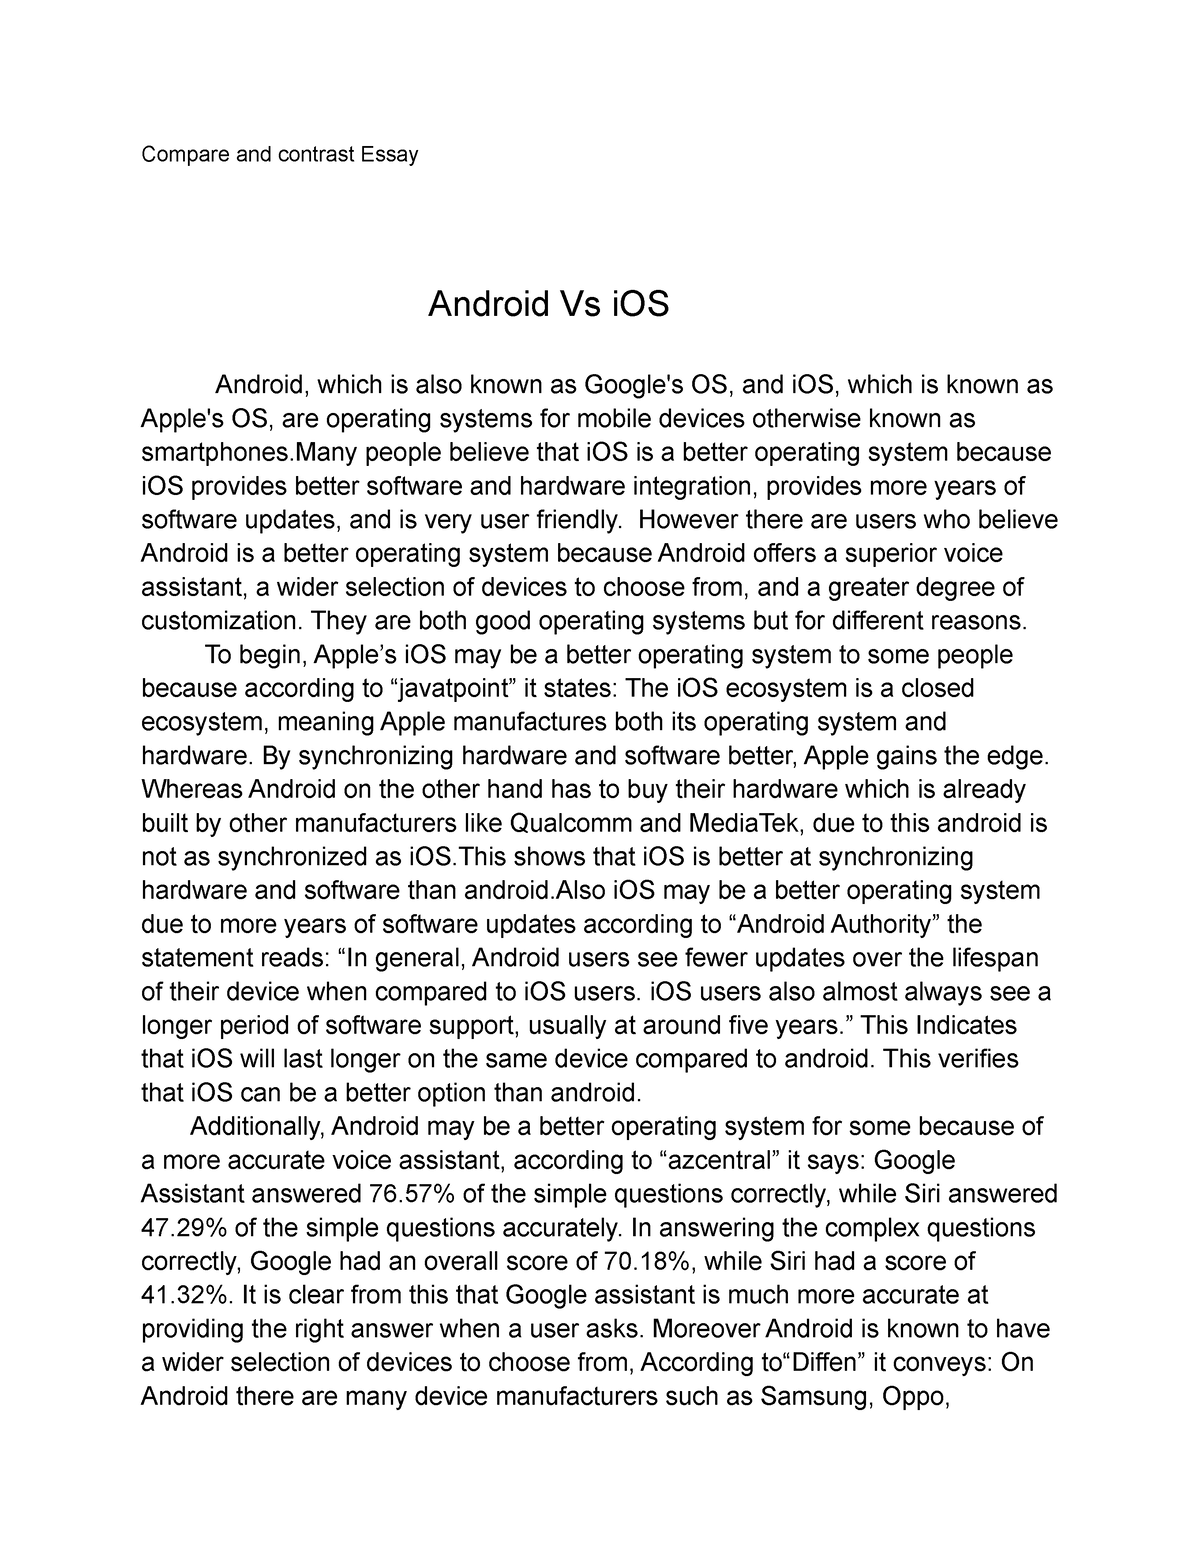 essay on android vs ios